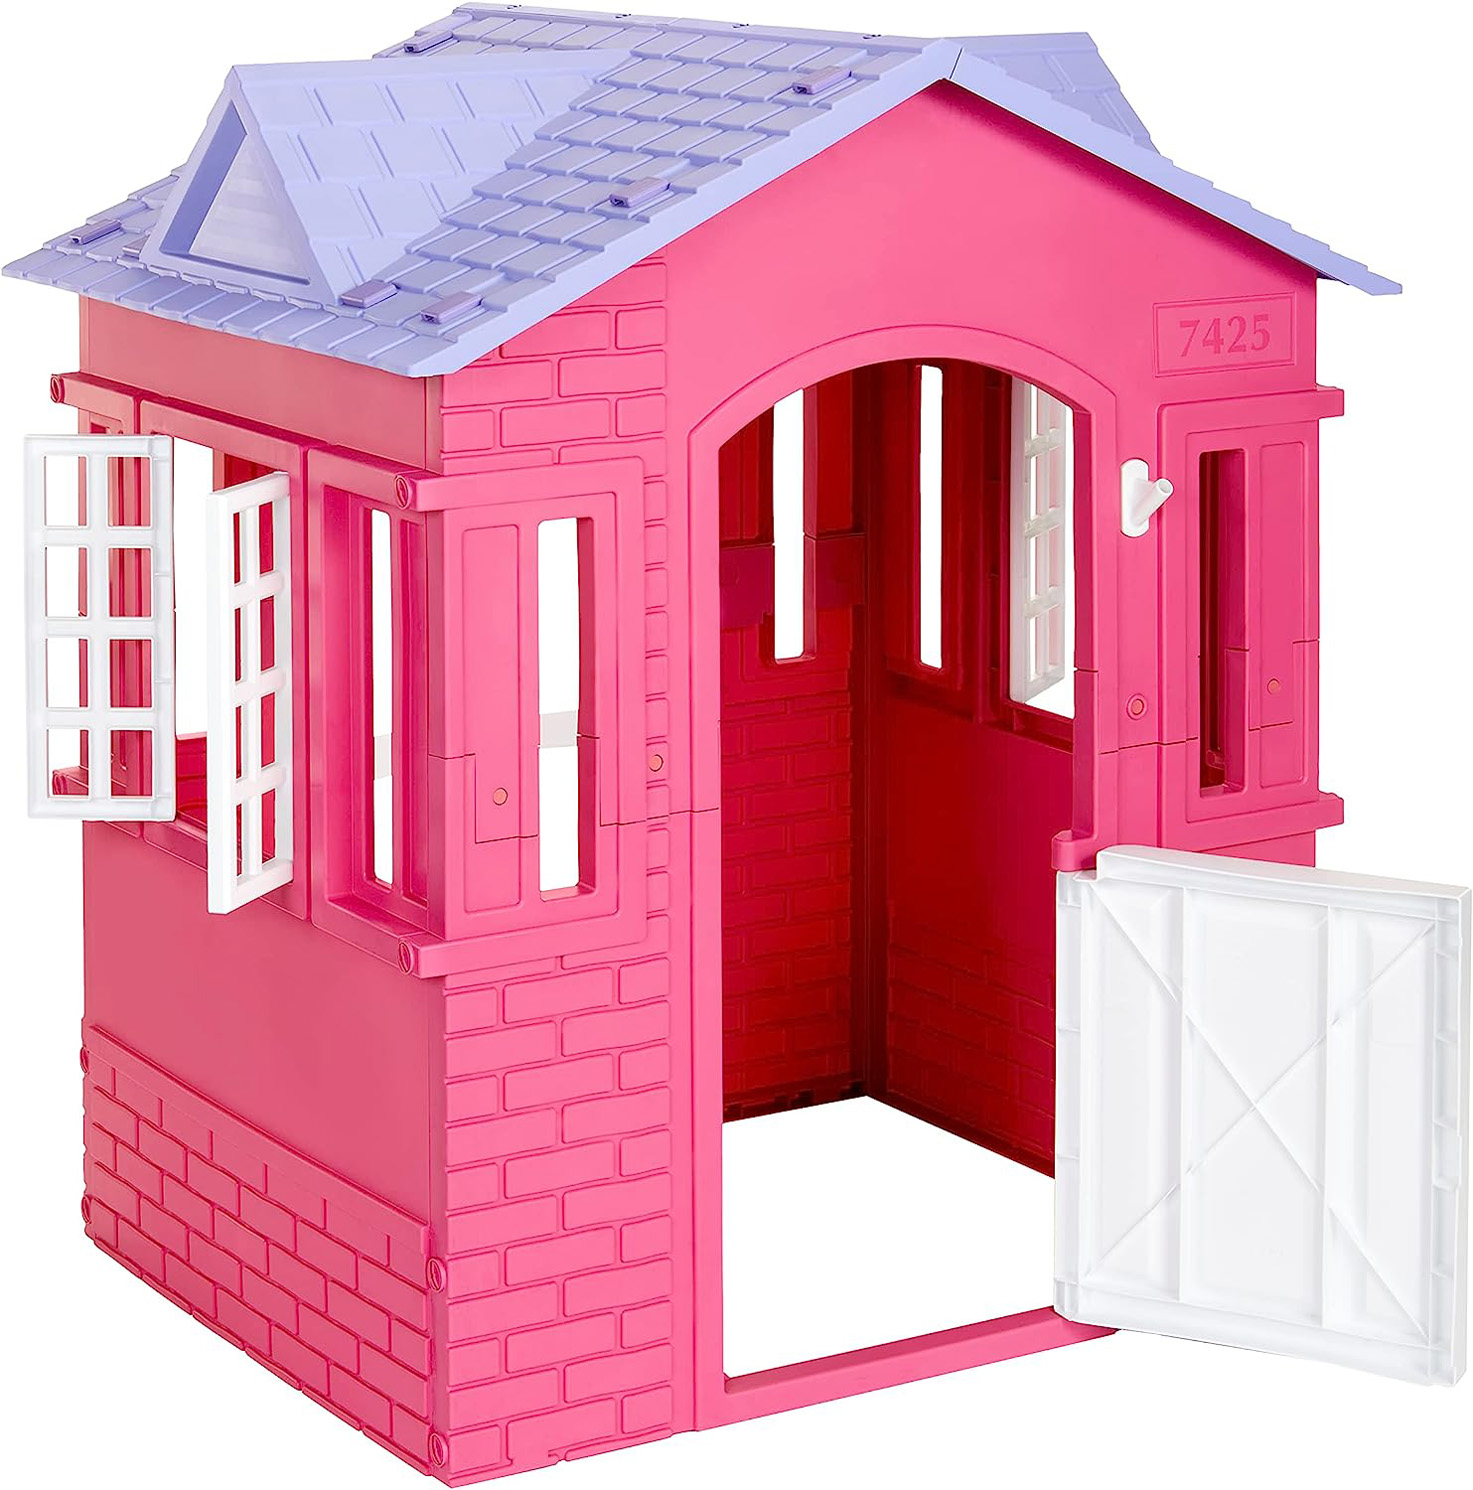 Little Tikes Cape Cottage House, Pink – Pretend Playhouse for Girls Boys Kids 2-8 Years Old